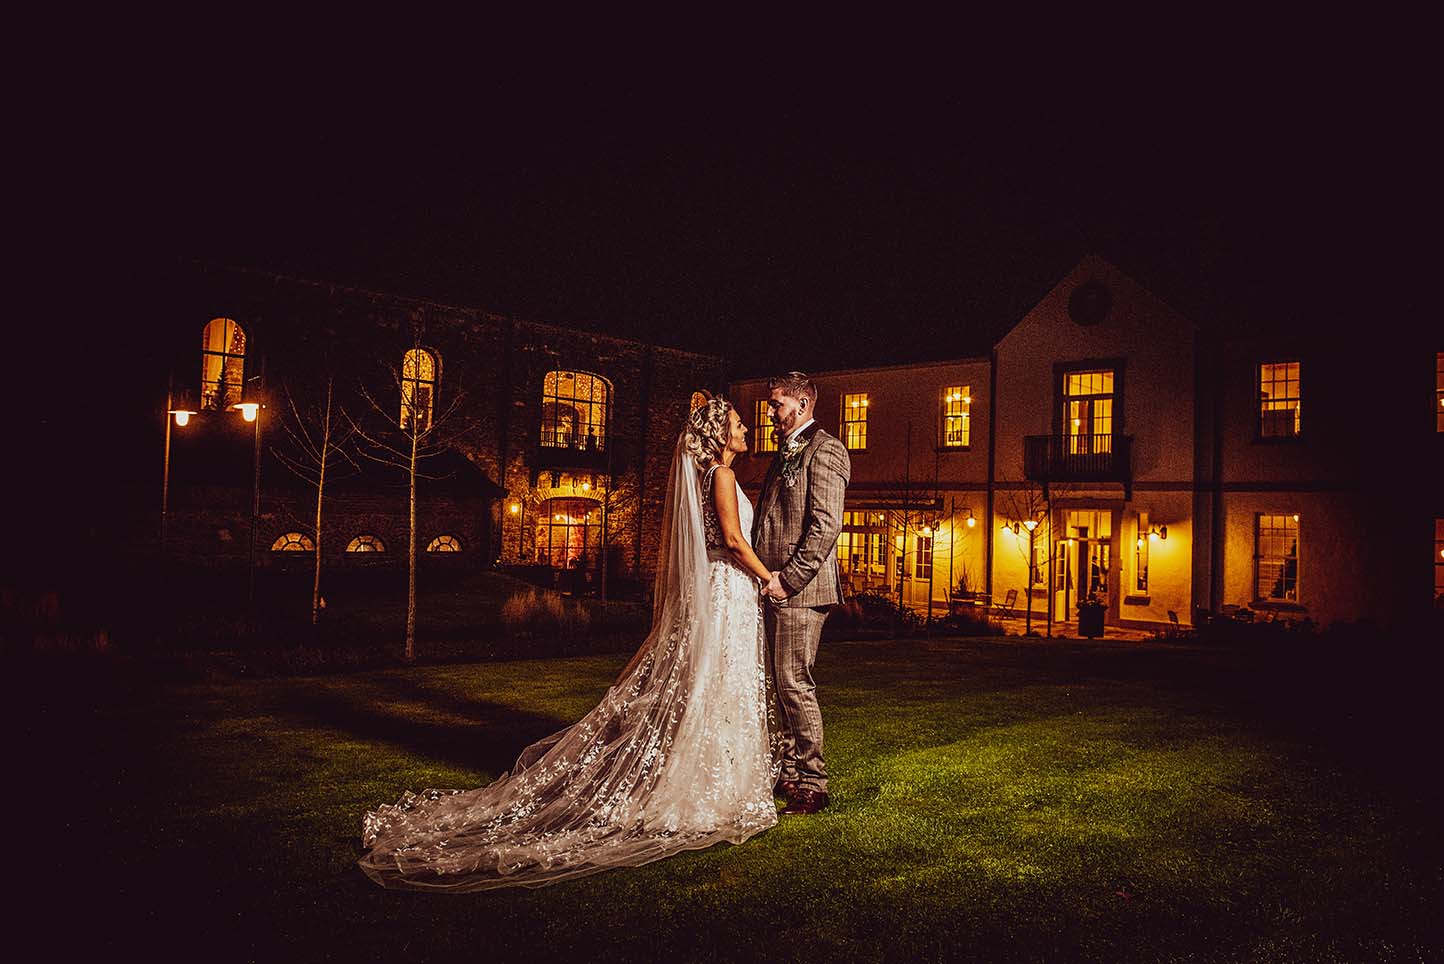 Tips for choosing your wedding photographer - Bride and Groom standing outside the amazing Montalto Estate in the dark - Wedding Photography Northern Ireland at its finest